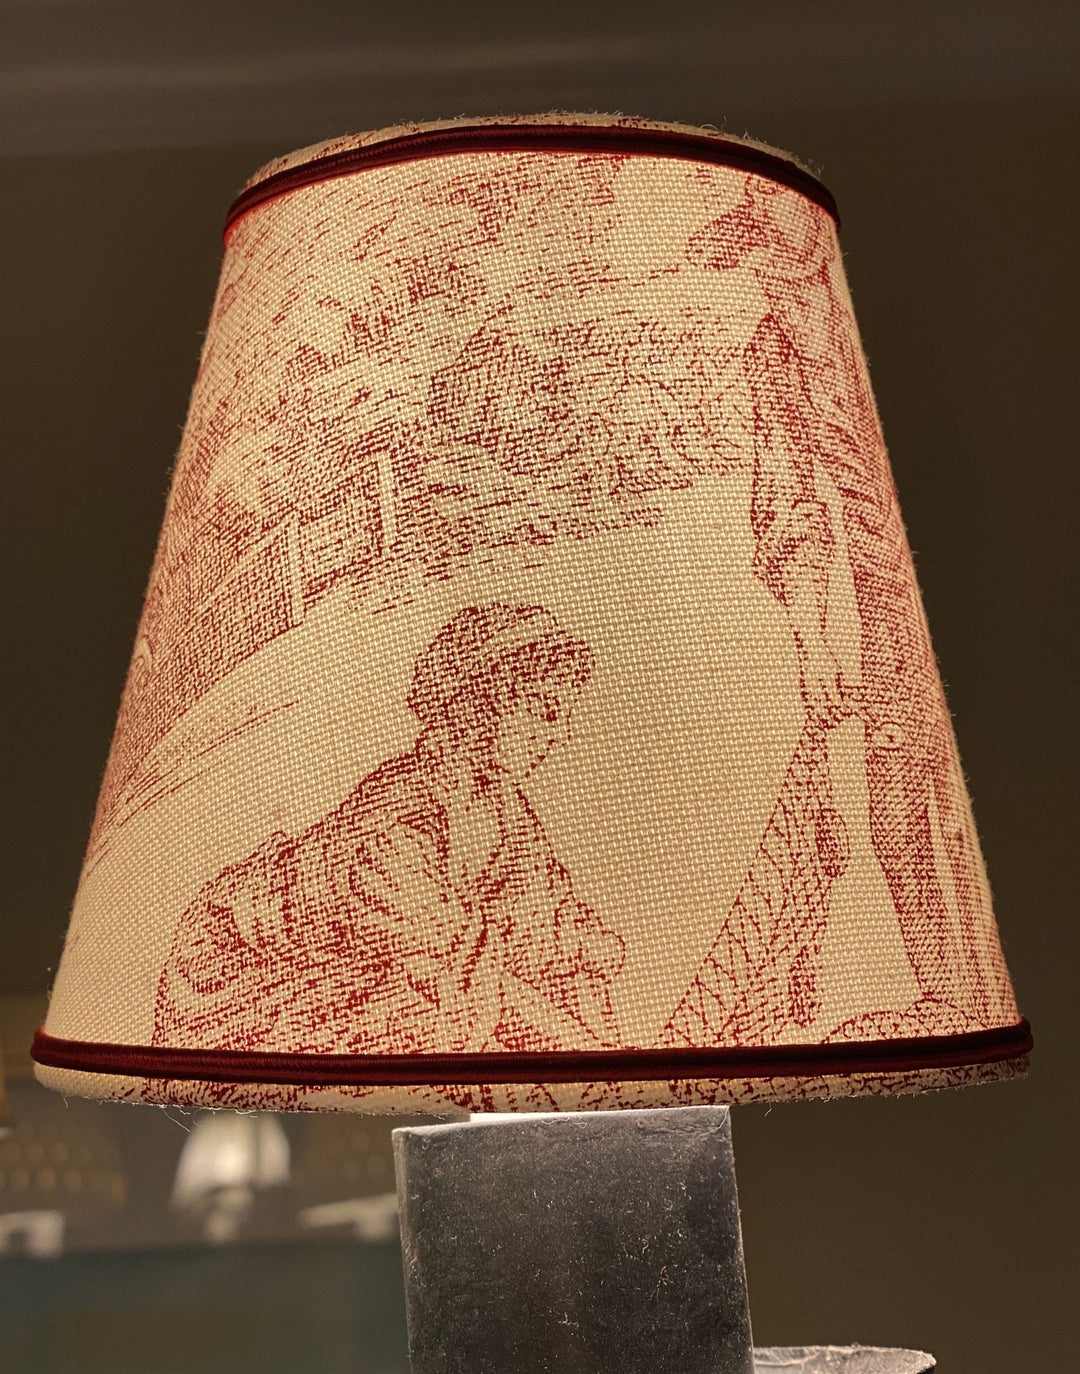 French made - Toile de Jouy Sconce Shades - Lux Lamp Shades